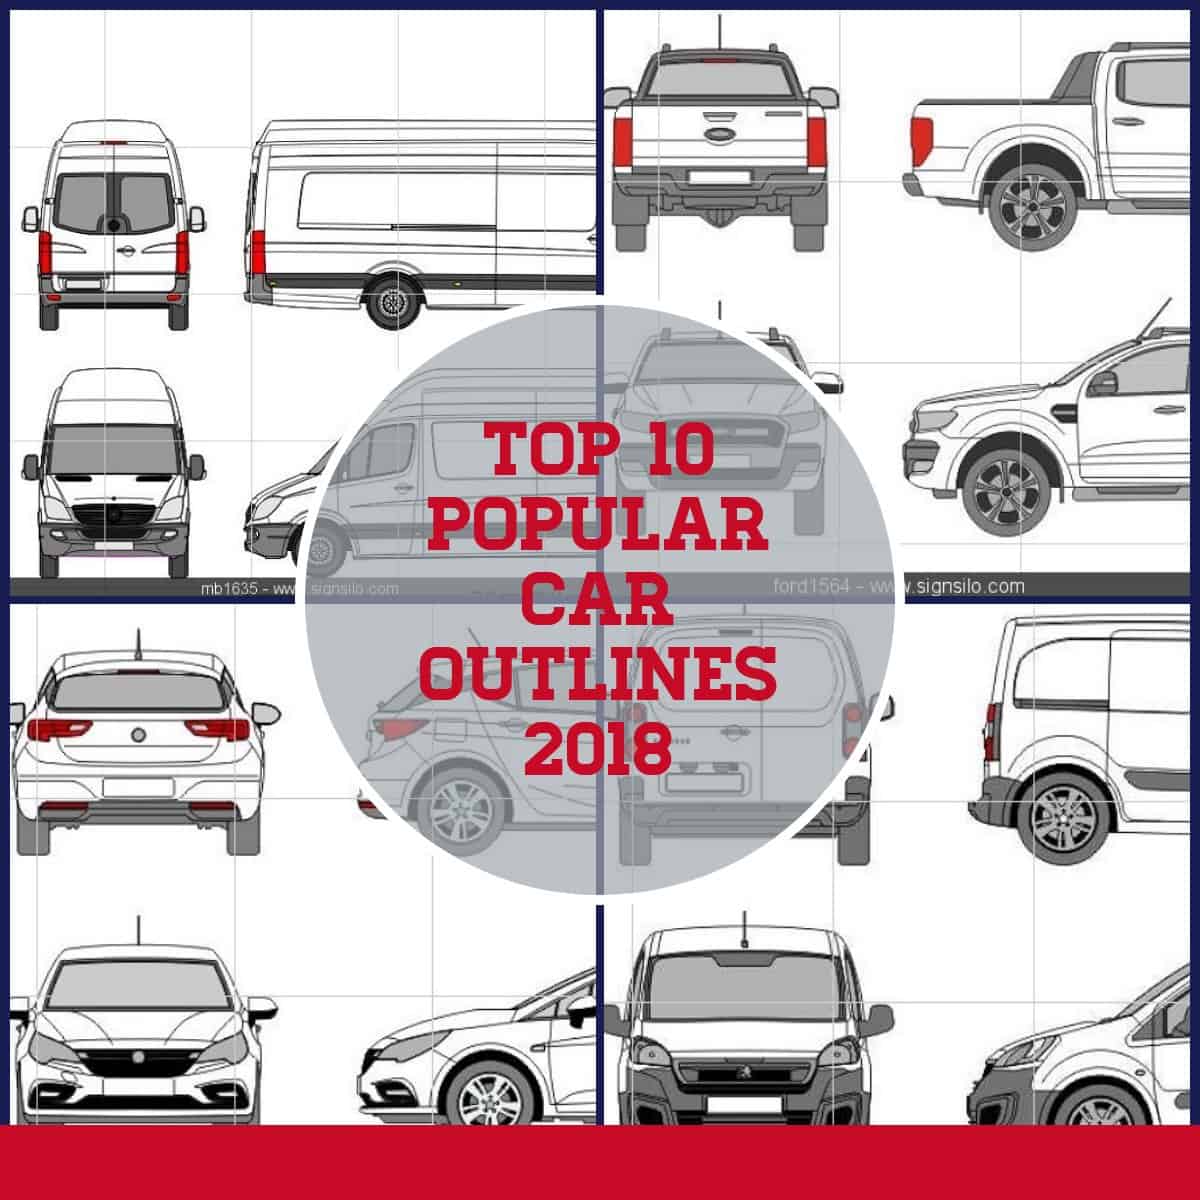 10 Most Popular Car Outlines 2018 - Discover This Year’s Top Vehicle Templates! 1